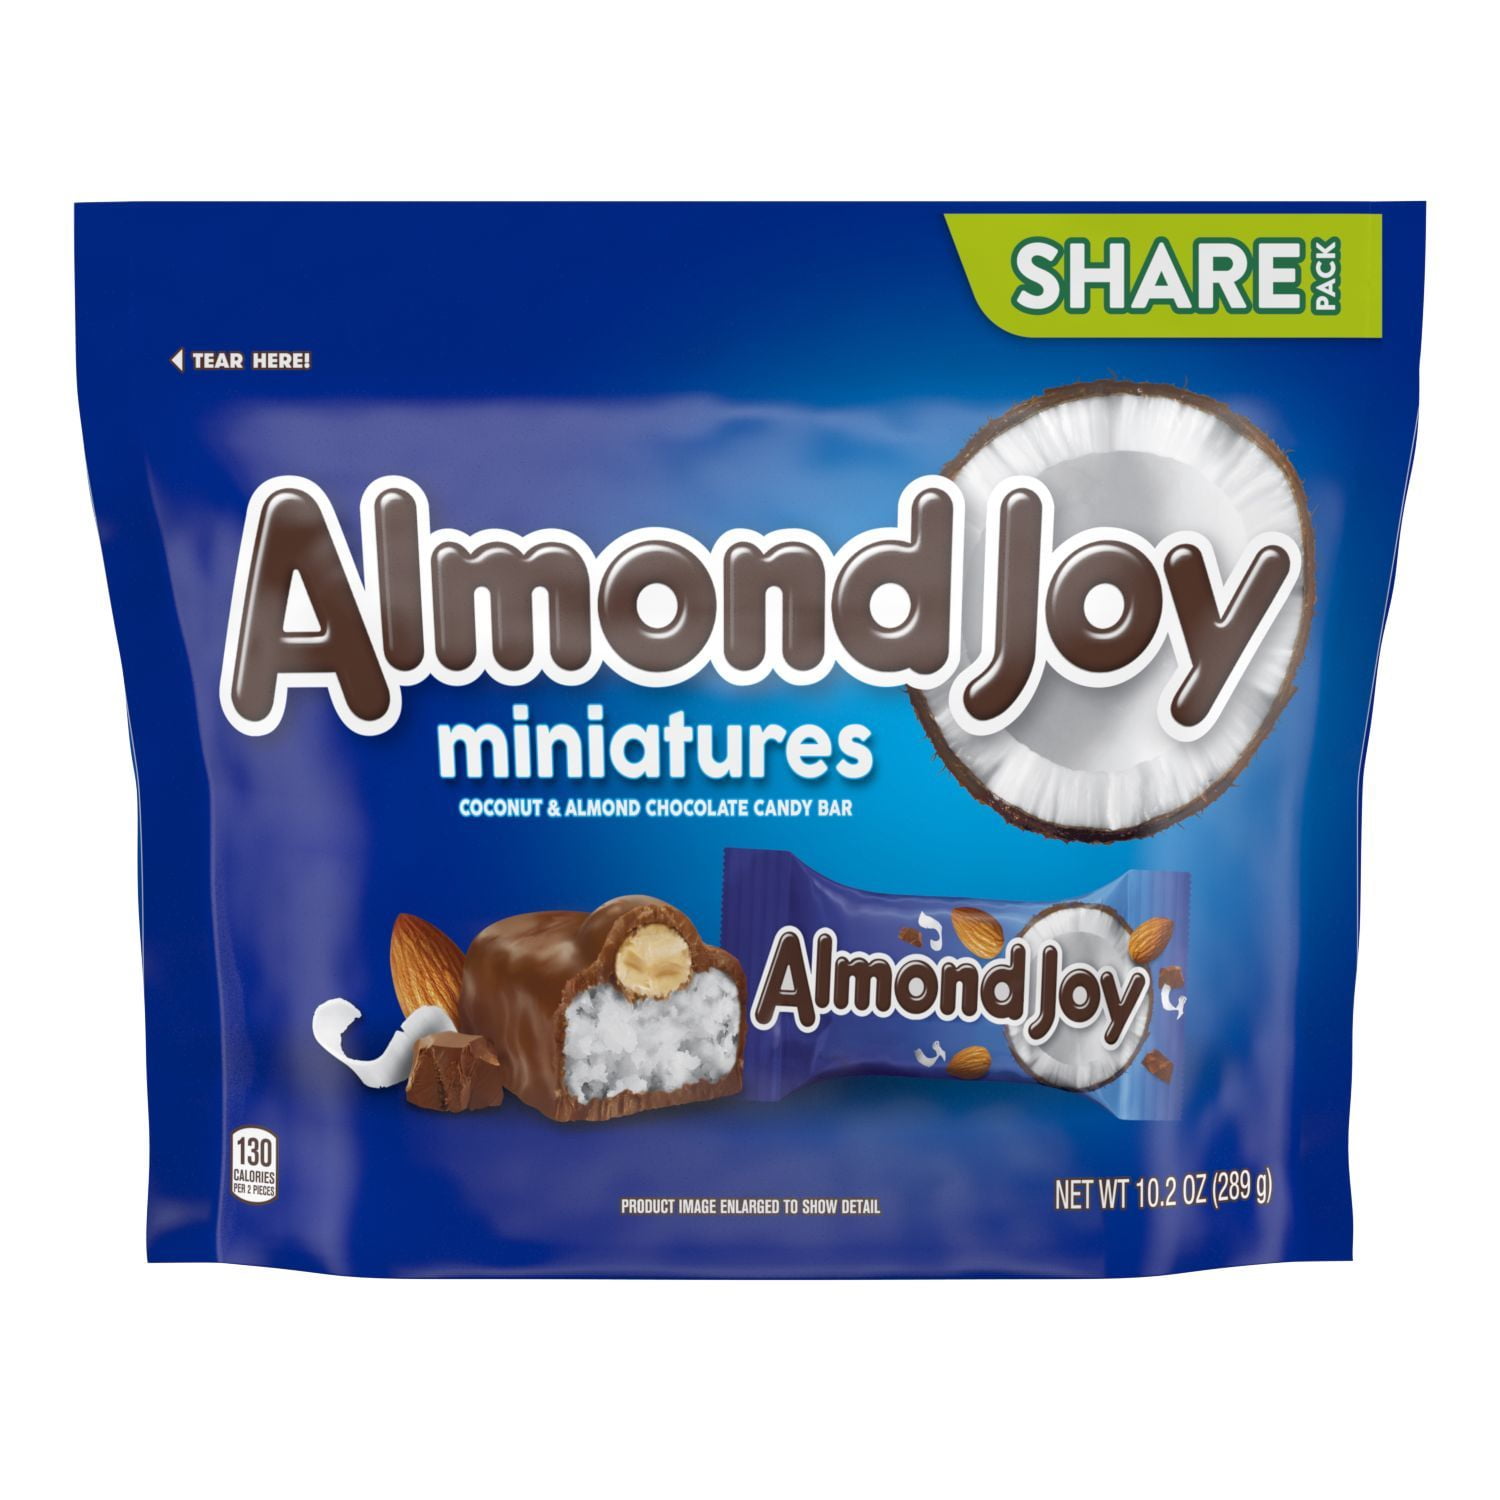 ALMOND JOY, Miniatures Coconut and Almond Chocolate Candy Bars, Gluten Free, Individually Wrapped, 10.2 oz, Share Pack